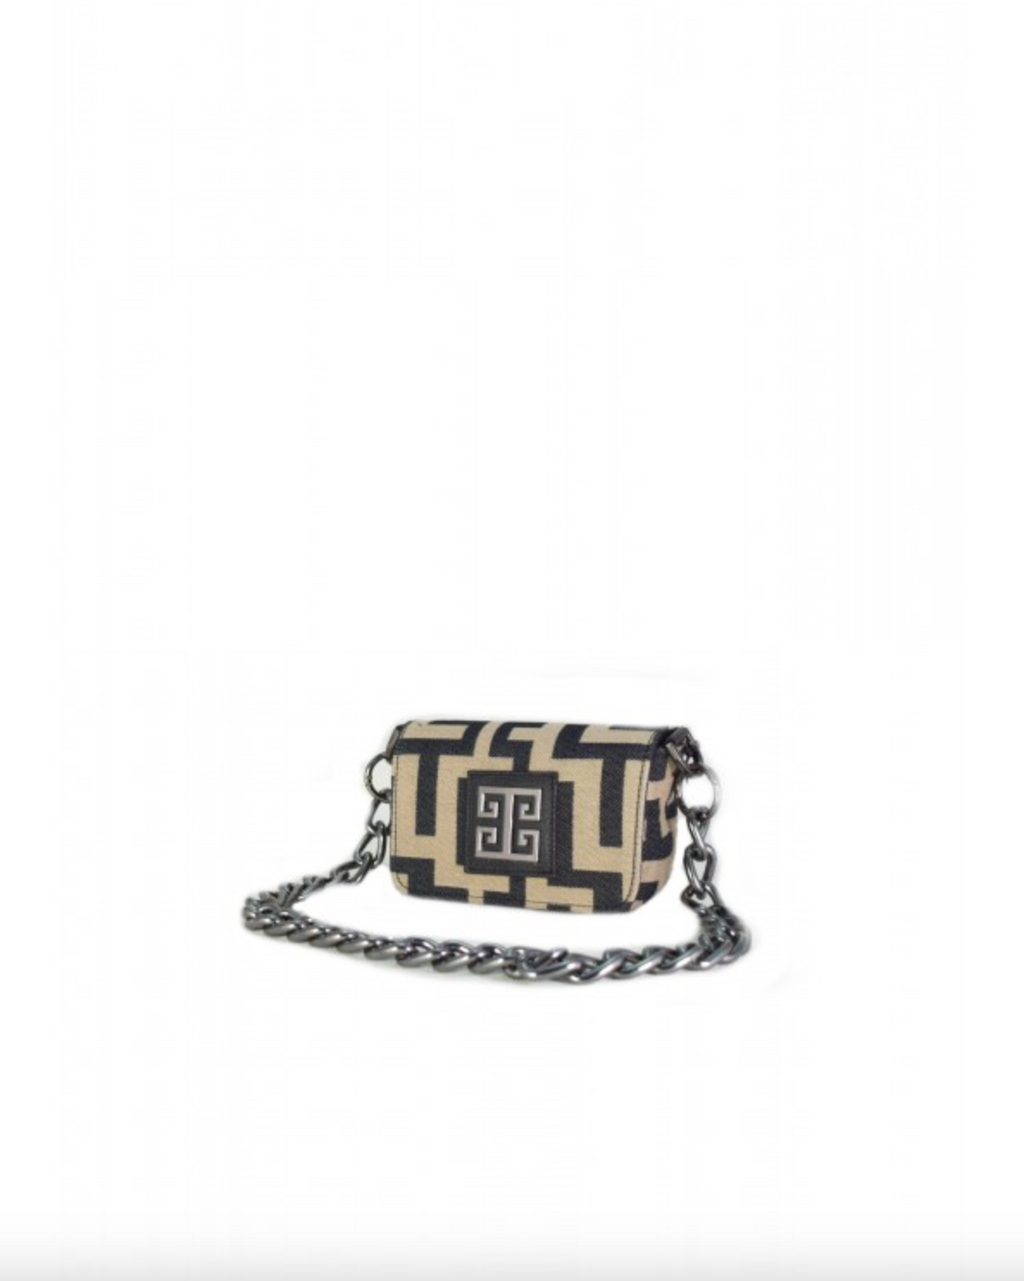 Agapi Purse in Black and Beige with Chain